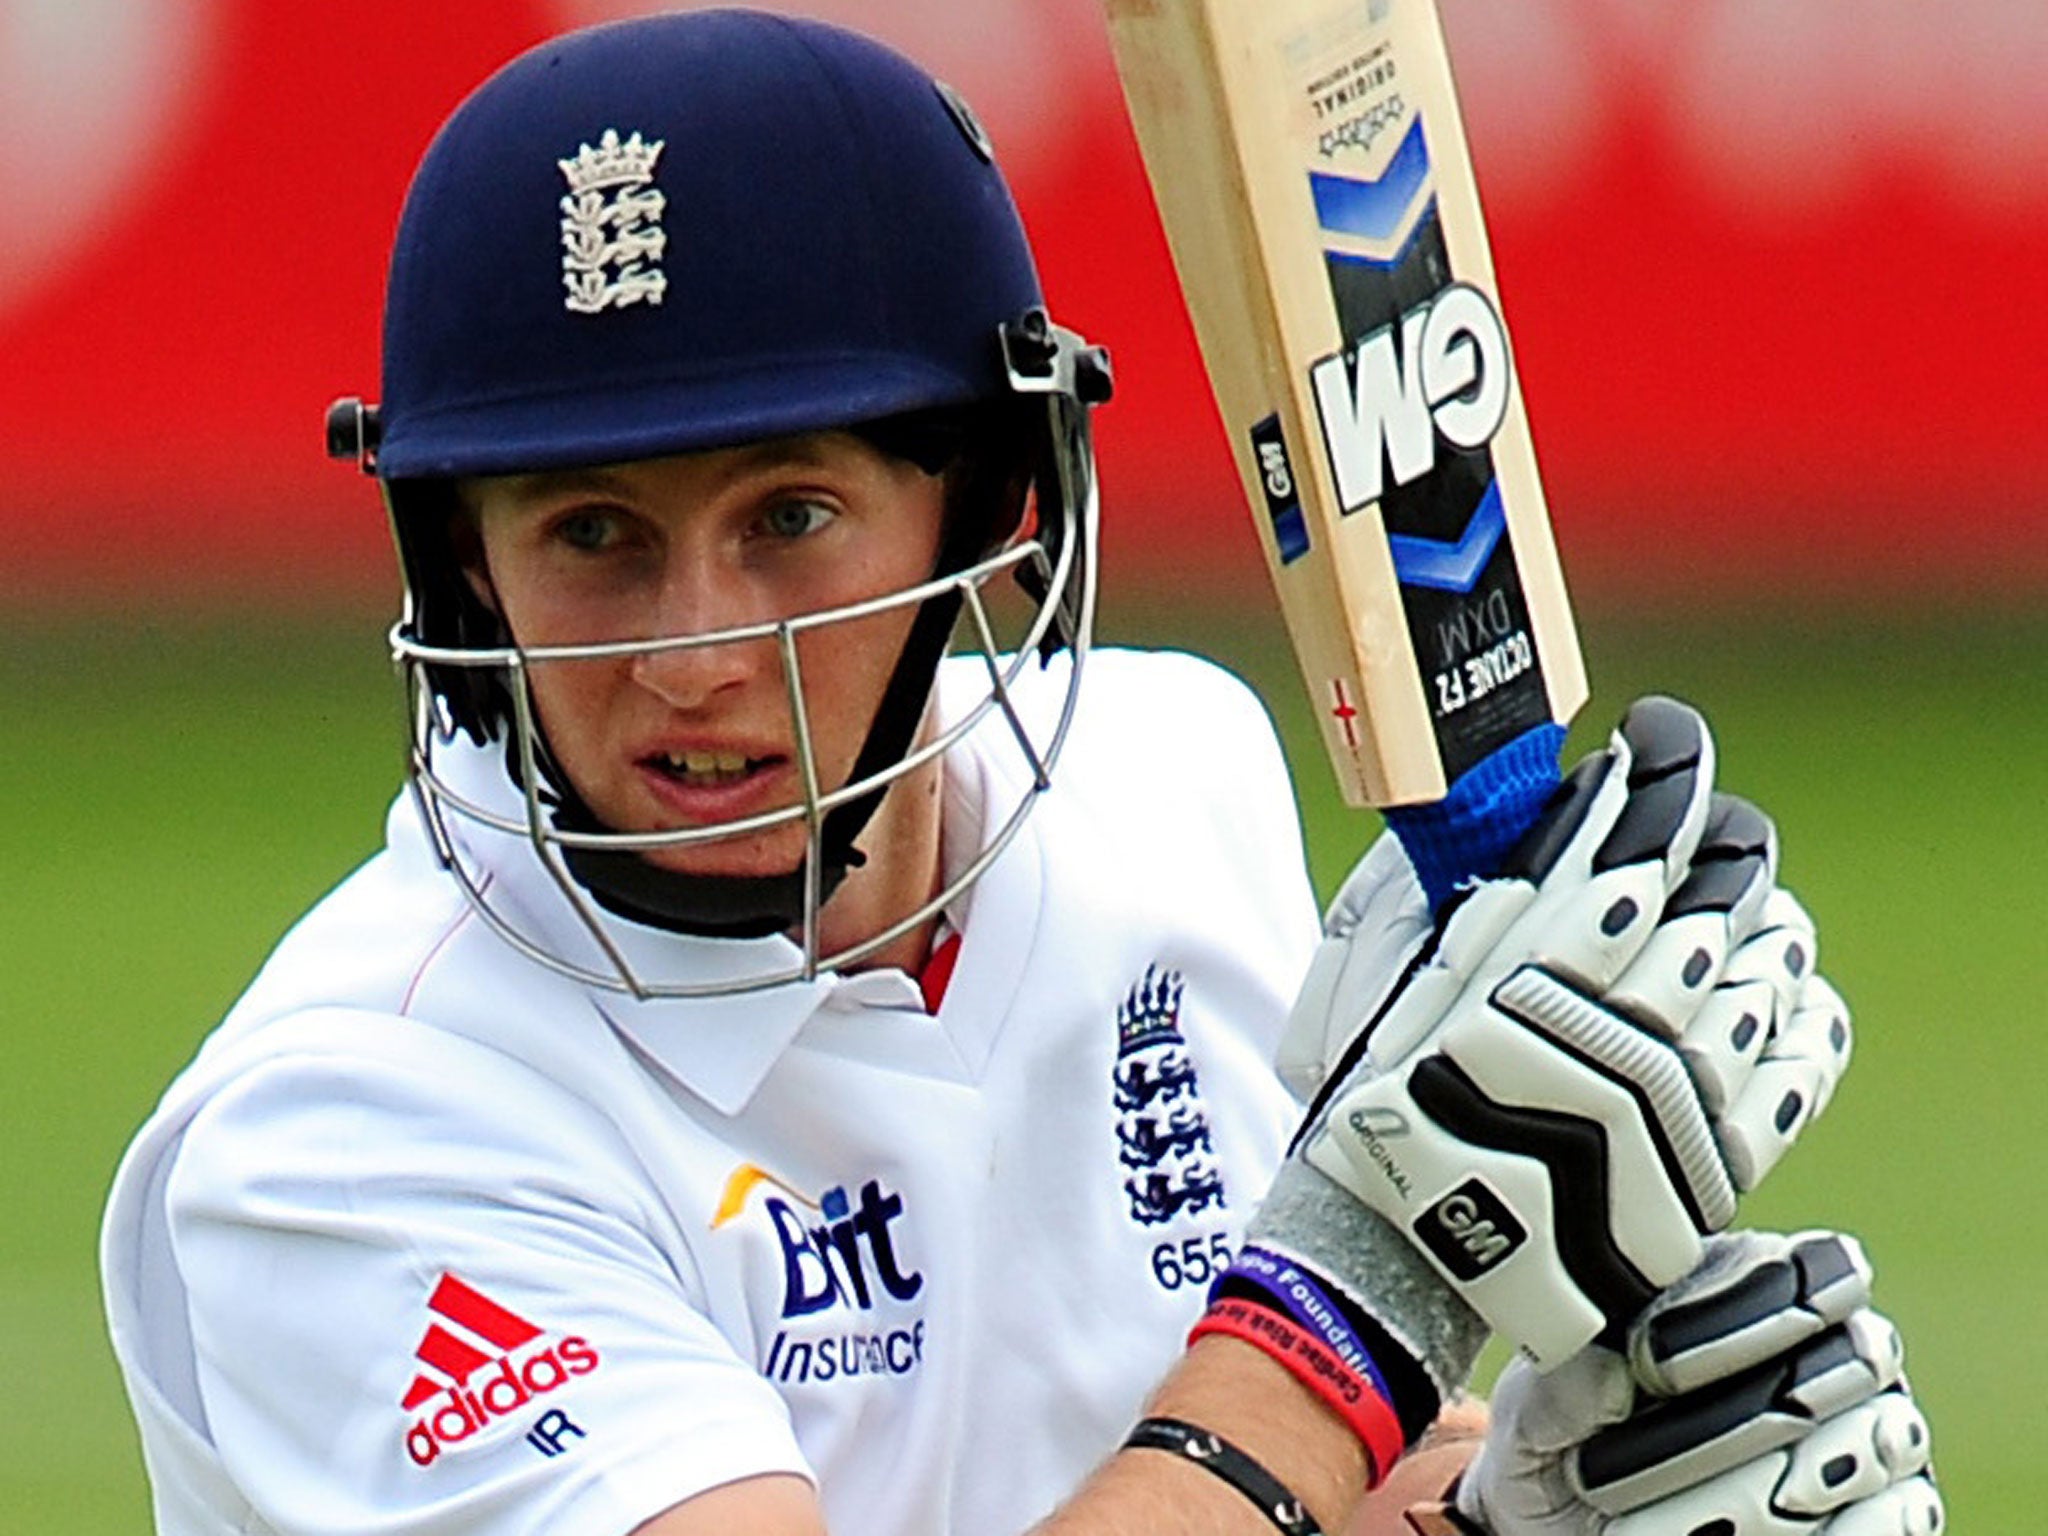 Joe Root played a captain’s innings for the England Lions